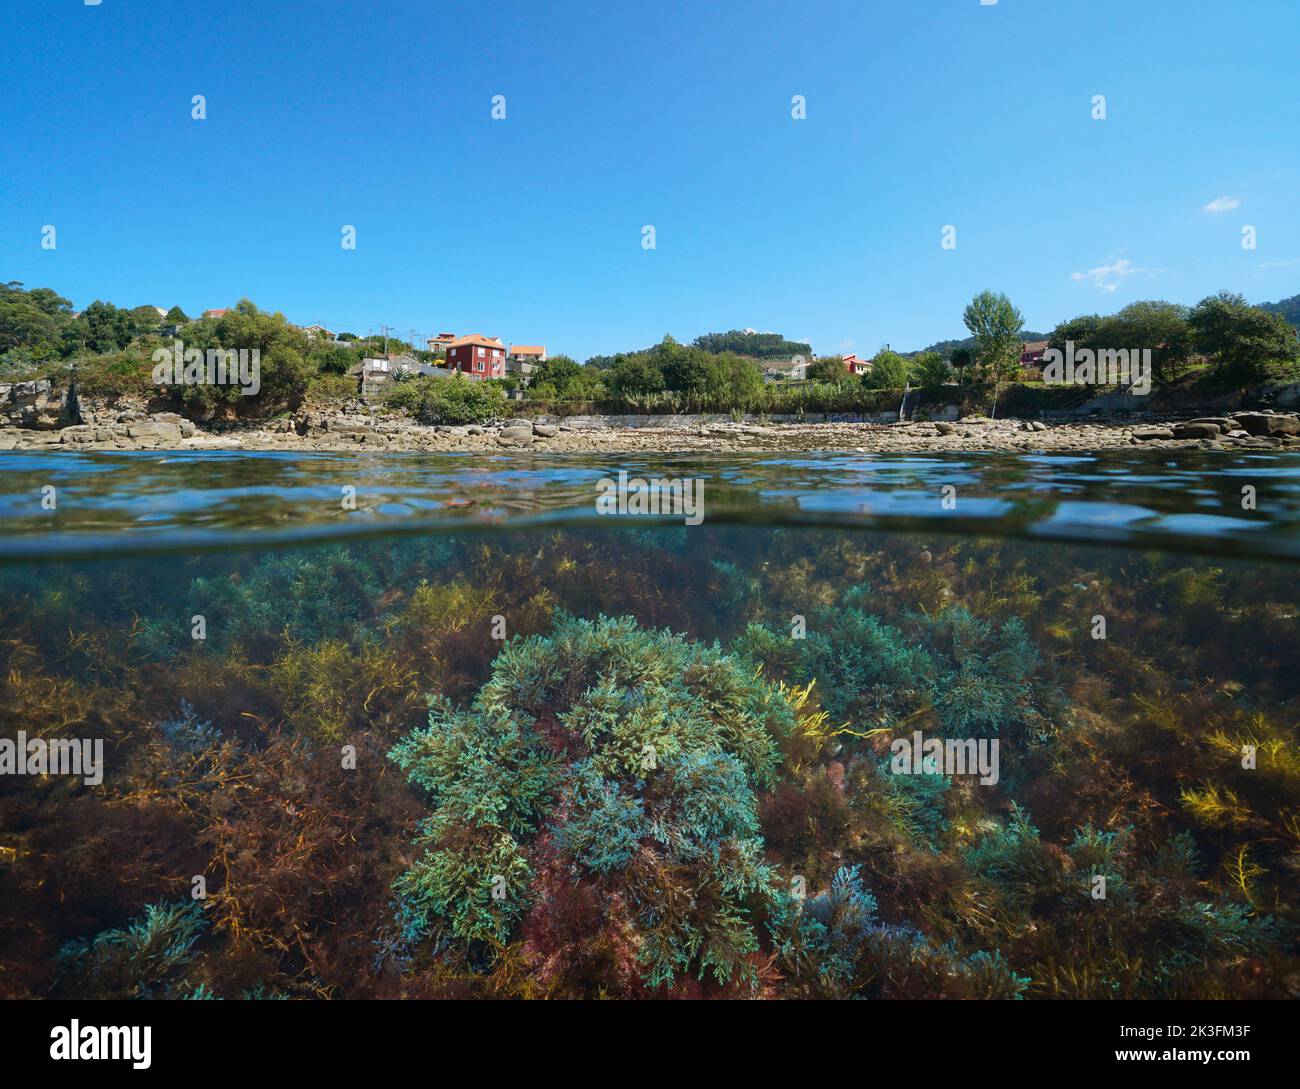 Atlantic coast of Galicia in Spain with algae in the ocean, split level view over and under water surface, Rias baixas, Marín Stock Photo